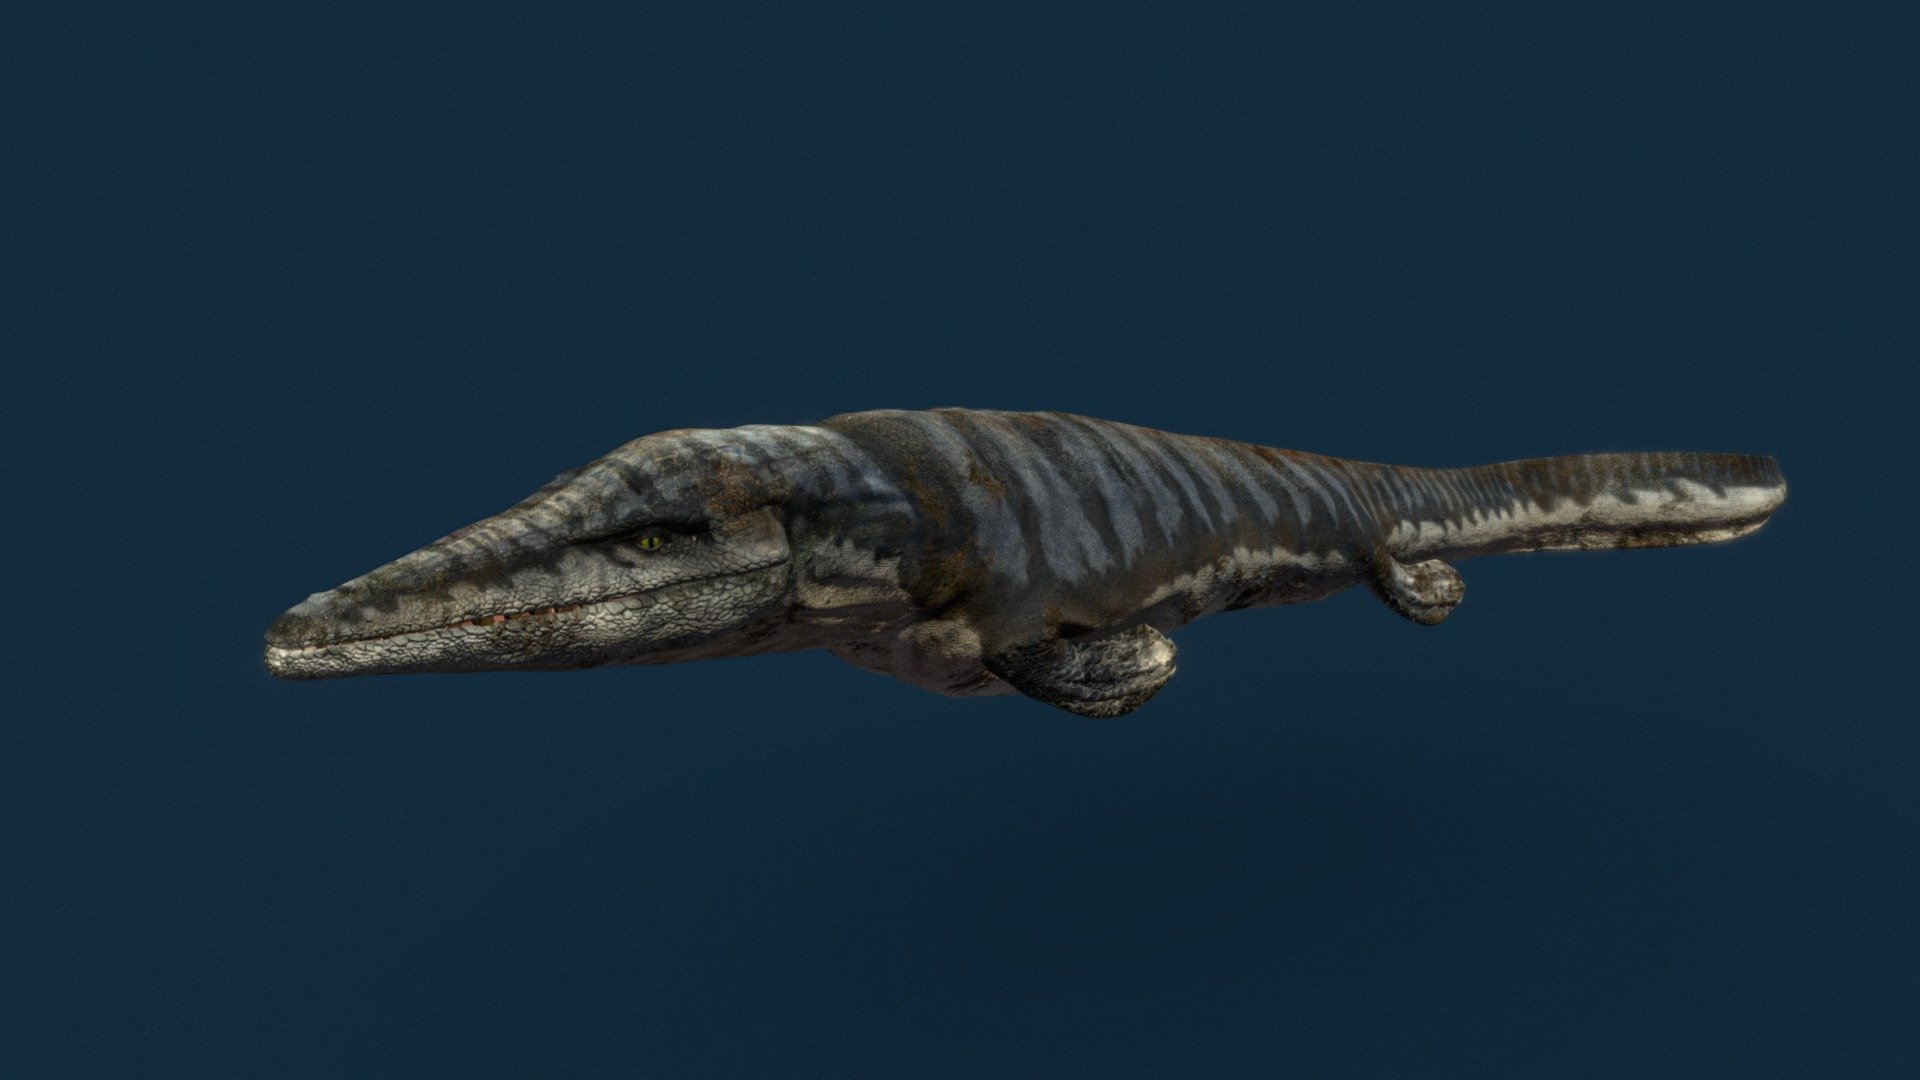 hello, heres a old tylo model  i made it about 15 years ago,  it was a free test model i  made to get some. work on a imax film.  

Tylosaurus was a mosasaur, a large, predatory marine reptile closely related to modern monitor lizards and to snakes, from the Late Cretaceous.

Length: 12 – 14 m

Lived: 93.9 million years ago - 66 million years ago

i tired exporting some animation with it , but sorry there was to many errors in the fbx  file.  i uploaded a old Maya rigged scene with animsation  for anyone interested.

https://drive.google.com/open?id=1XbIuzLruFAYLyAw4G9XCzExVgD-lIFSx

Instagram https://www.instagram.com/julian_johnson1234/ - Tylosaurus - Download Free 3D model by Julian Johnson-Mortimer (@FreddyFoxFreddy) 3d model